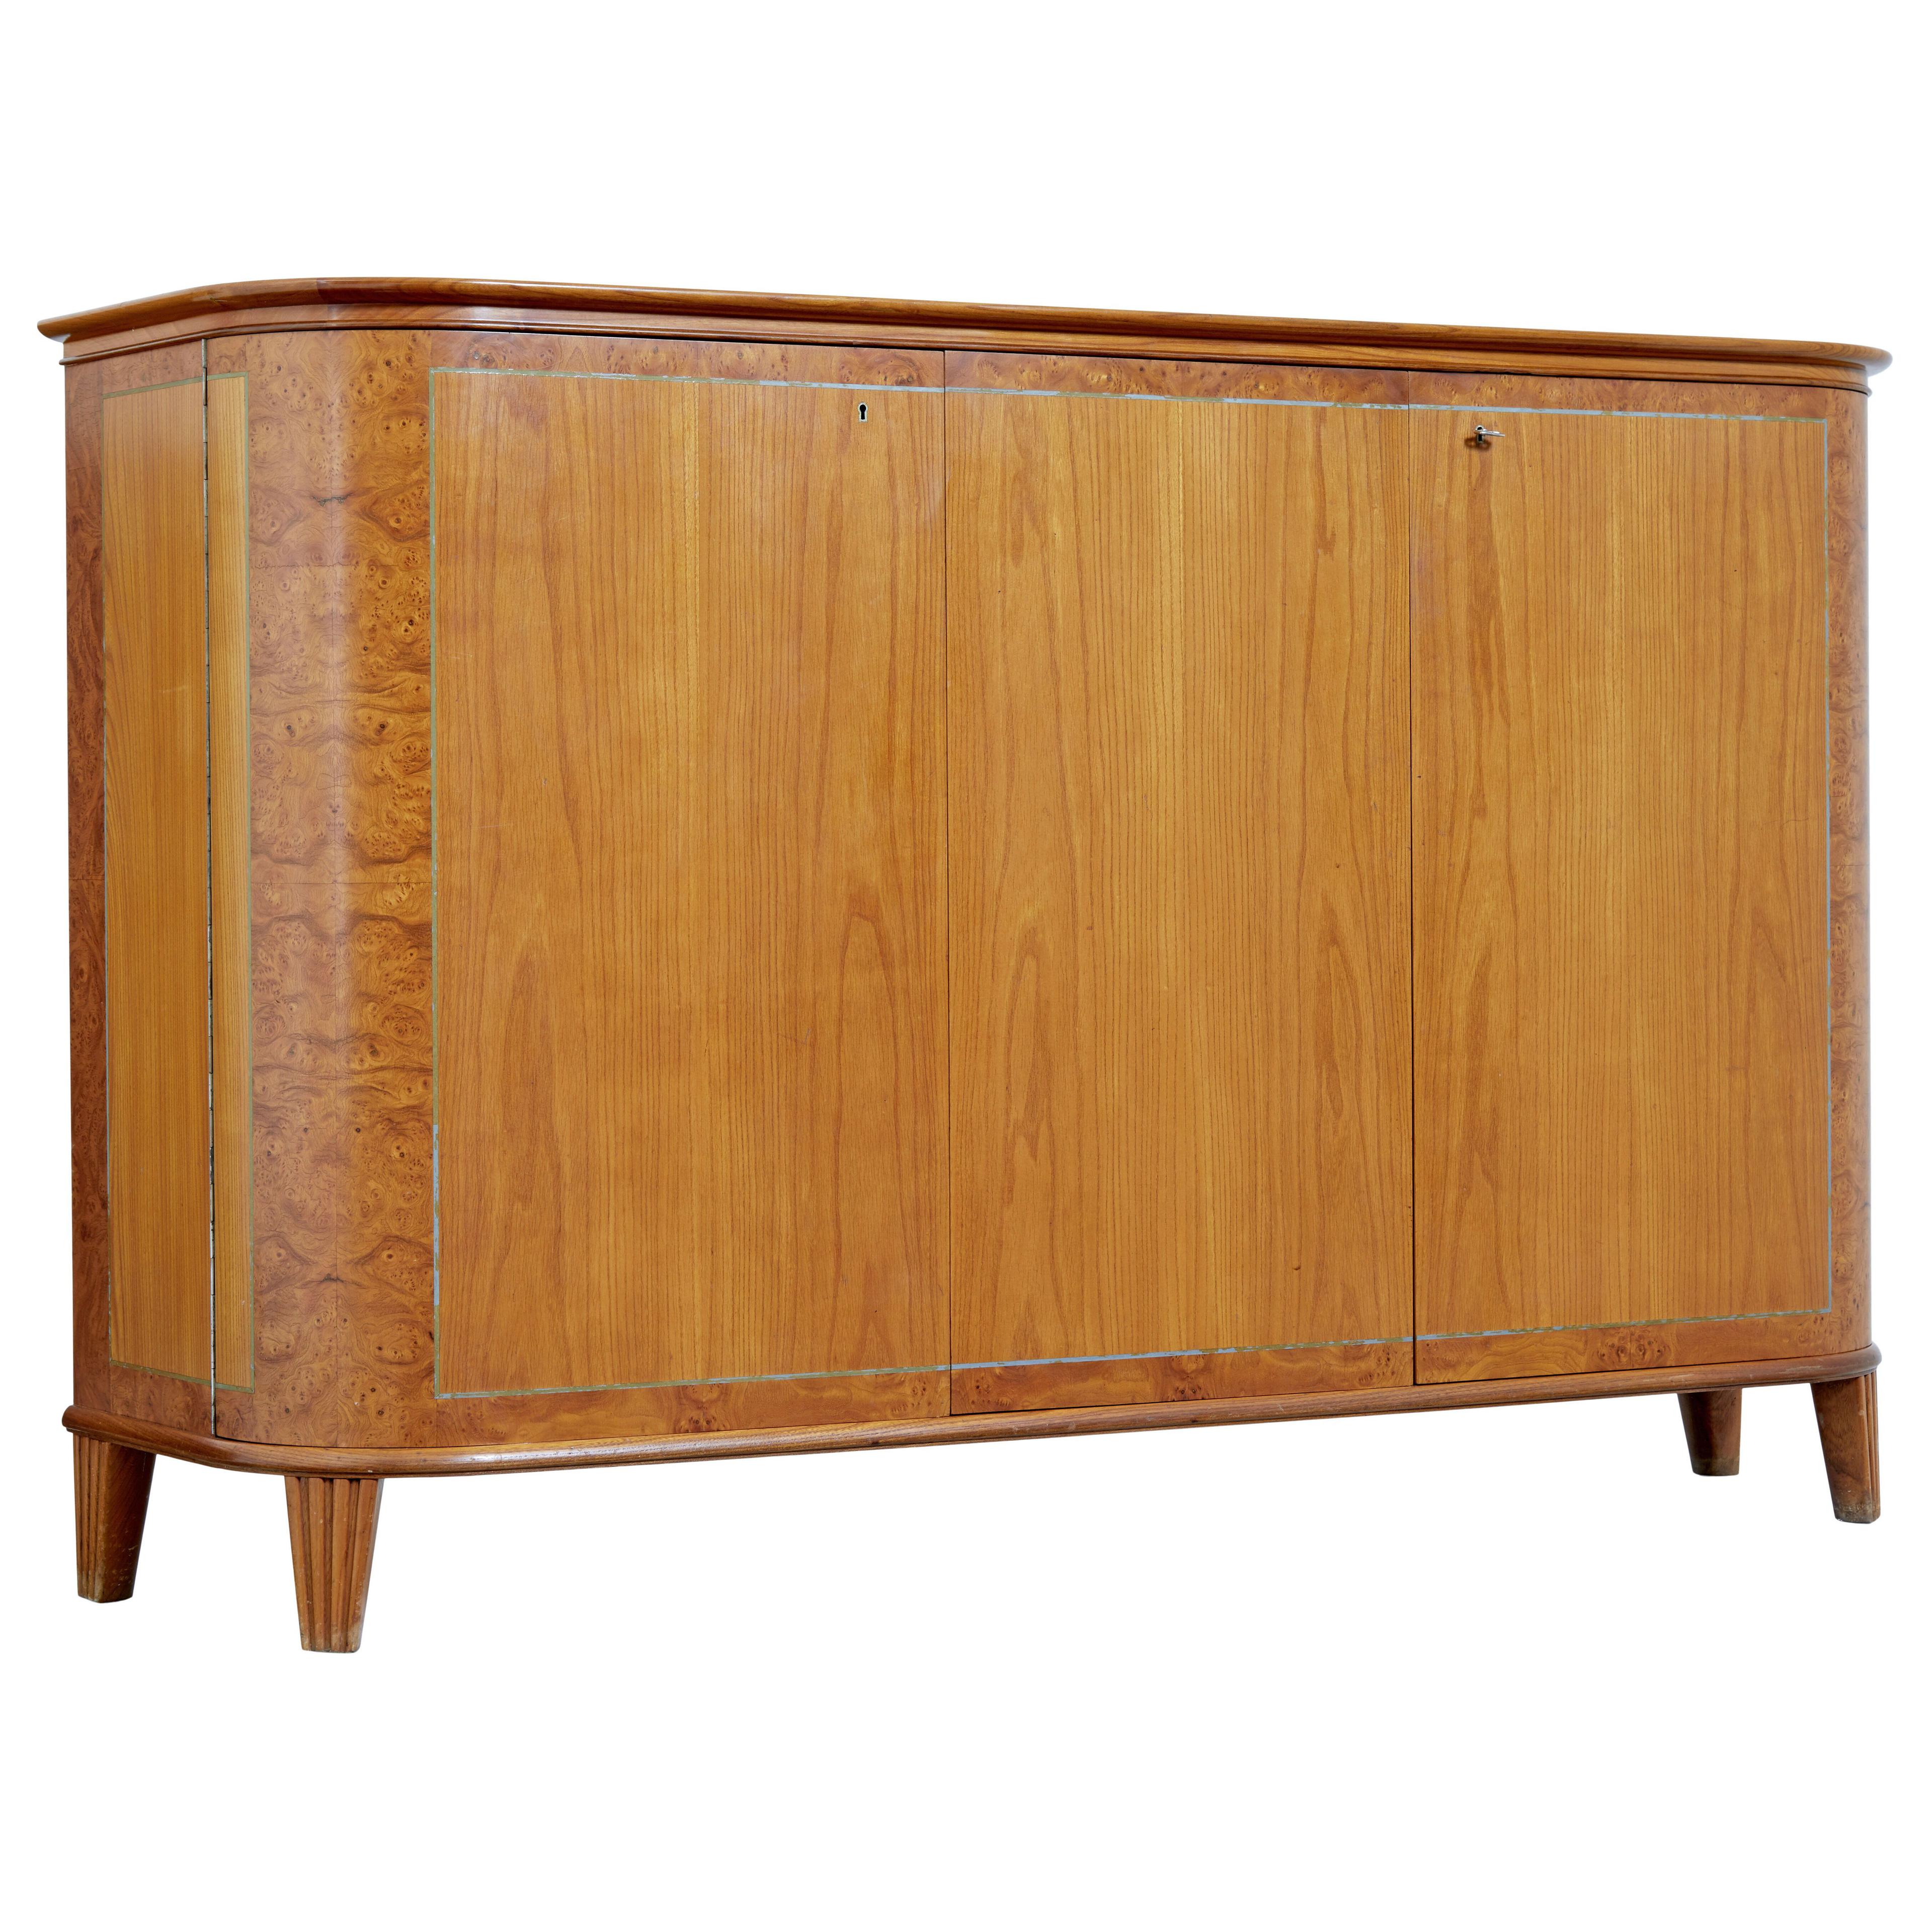 MID CENTURY ELM SIDEBOARD BY THYSELLS MOBLER